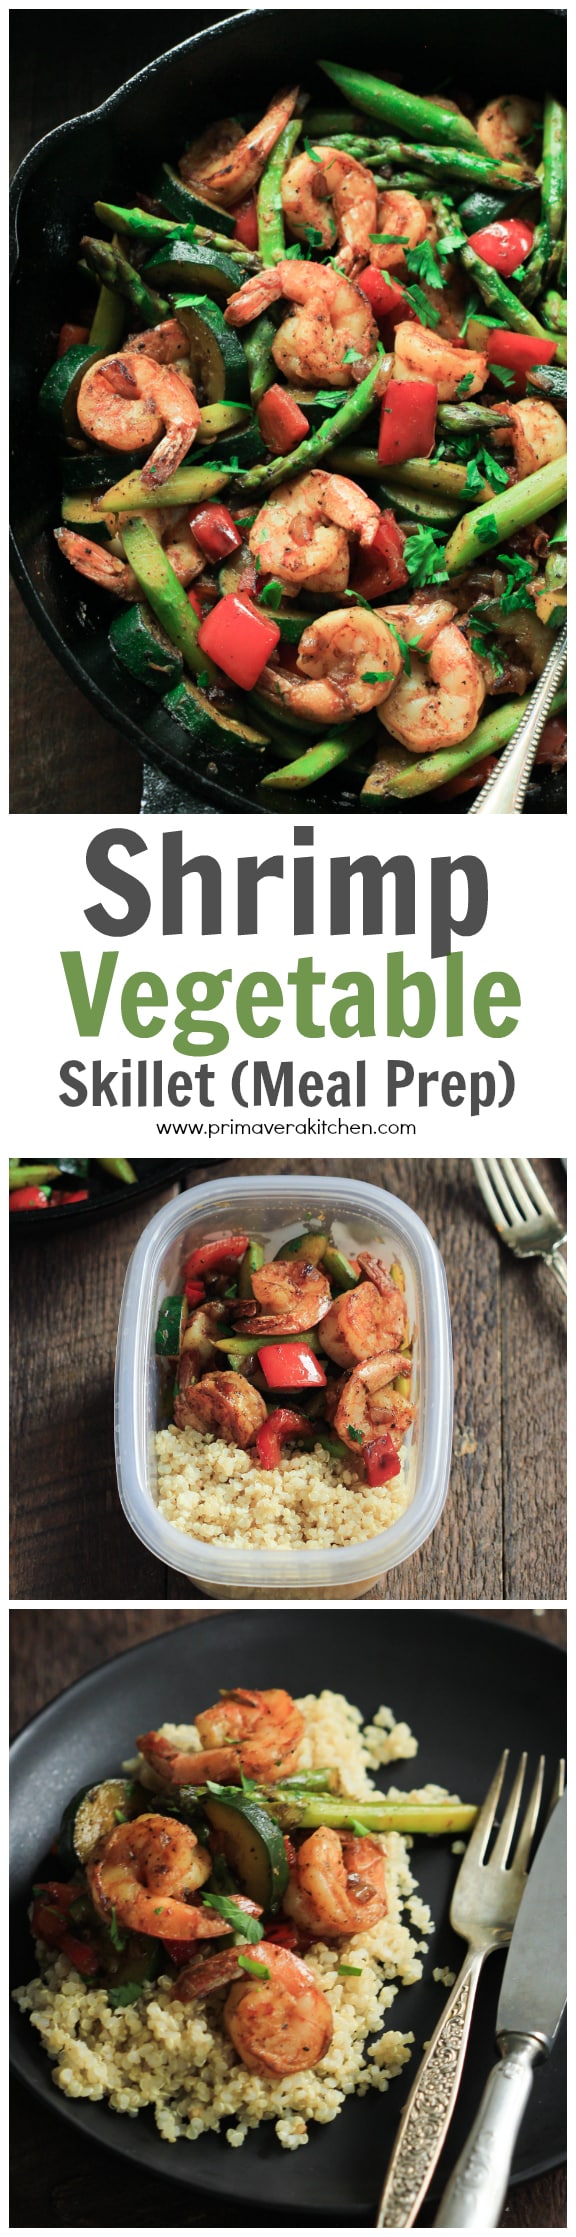 This ultra-easy Shrimp Vegetable Skillet recipe is loaded with veggies, flavorful spices and shrimp. It’s a low-carb, gluten-free and paleo one-pan meal that is ready in less than 30 minutes. | www.primaverakitchen.com